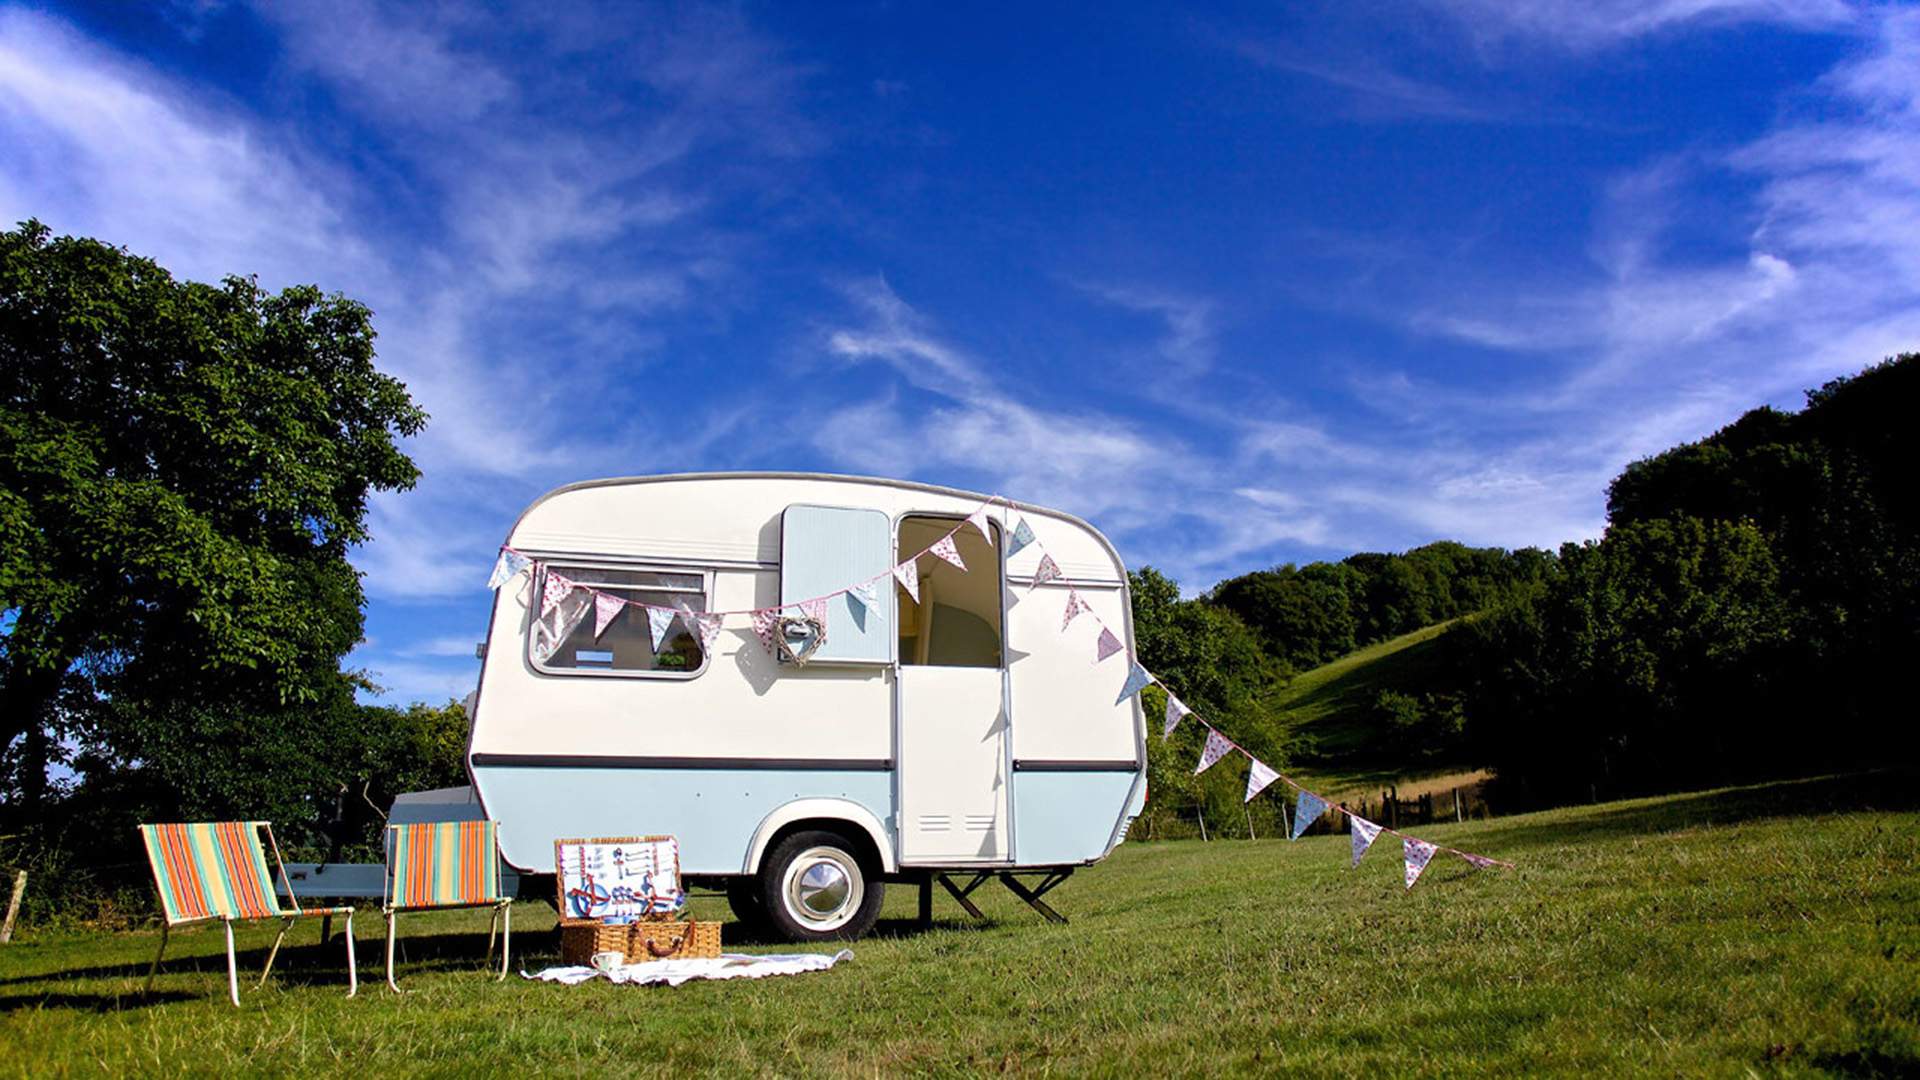 Aussie Platform Camplify Is Like the Airbnb for Campervans